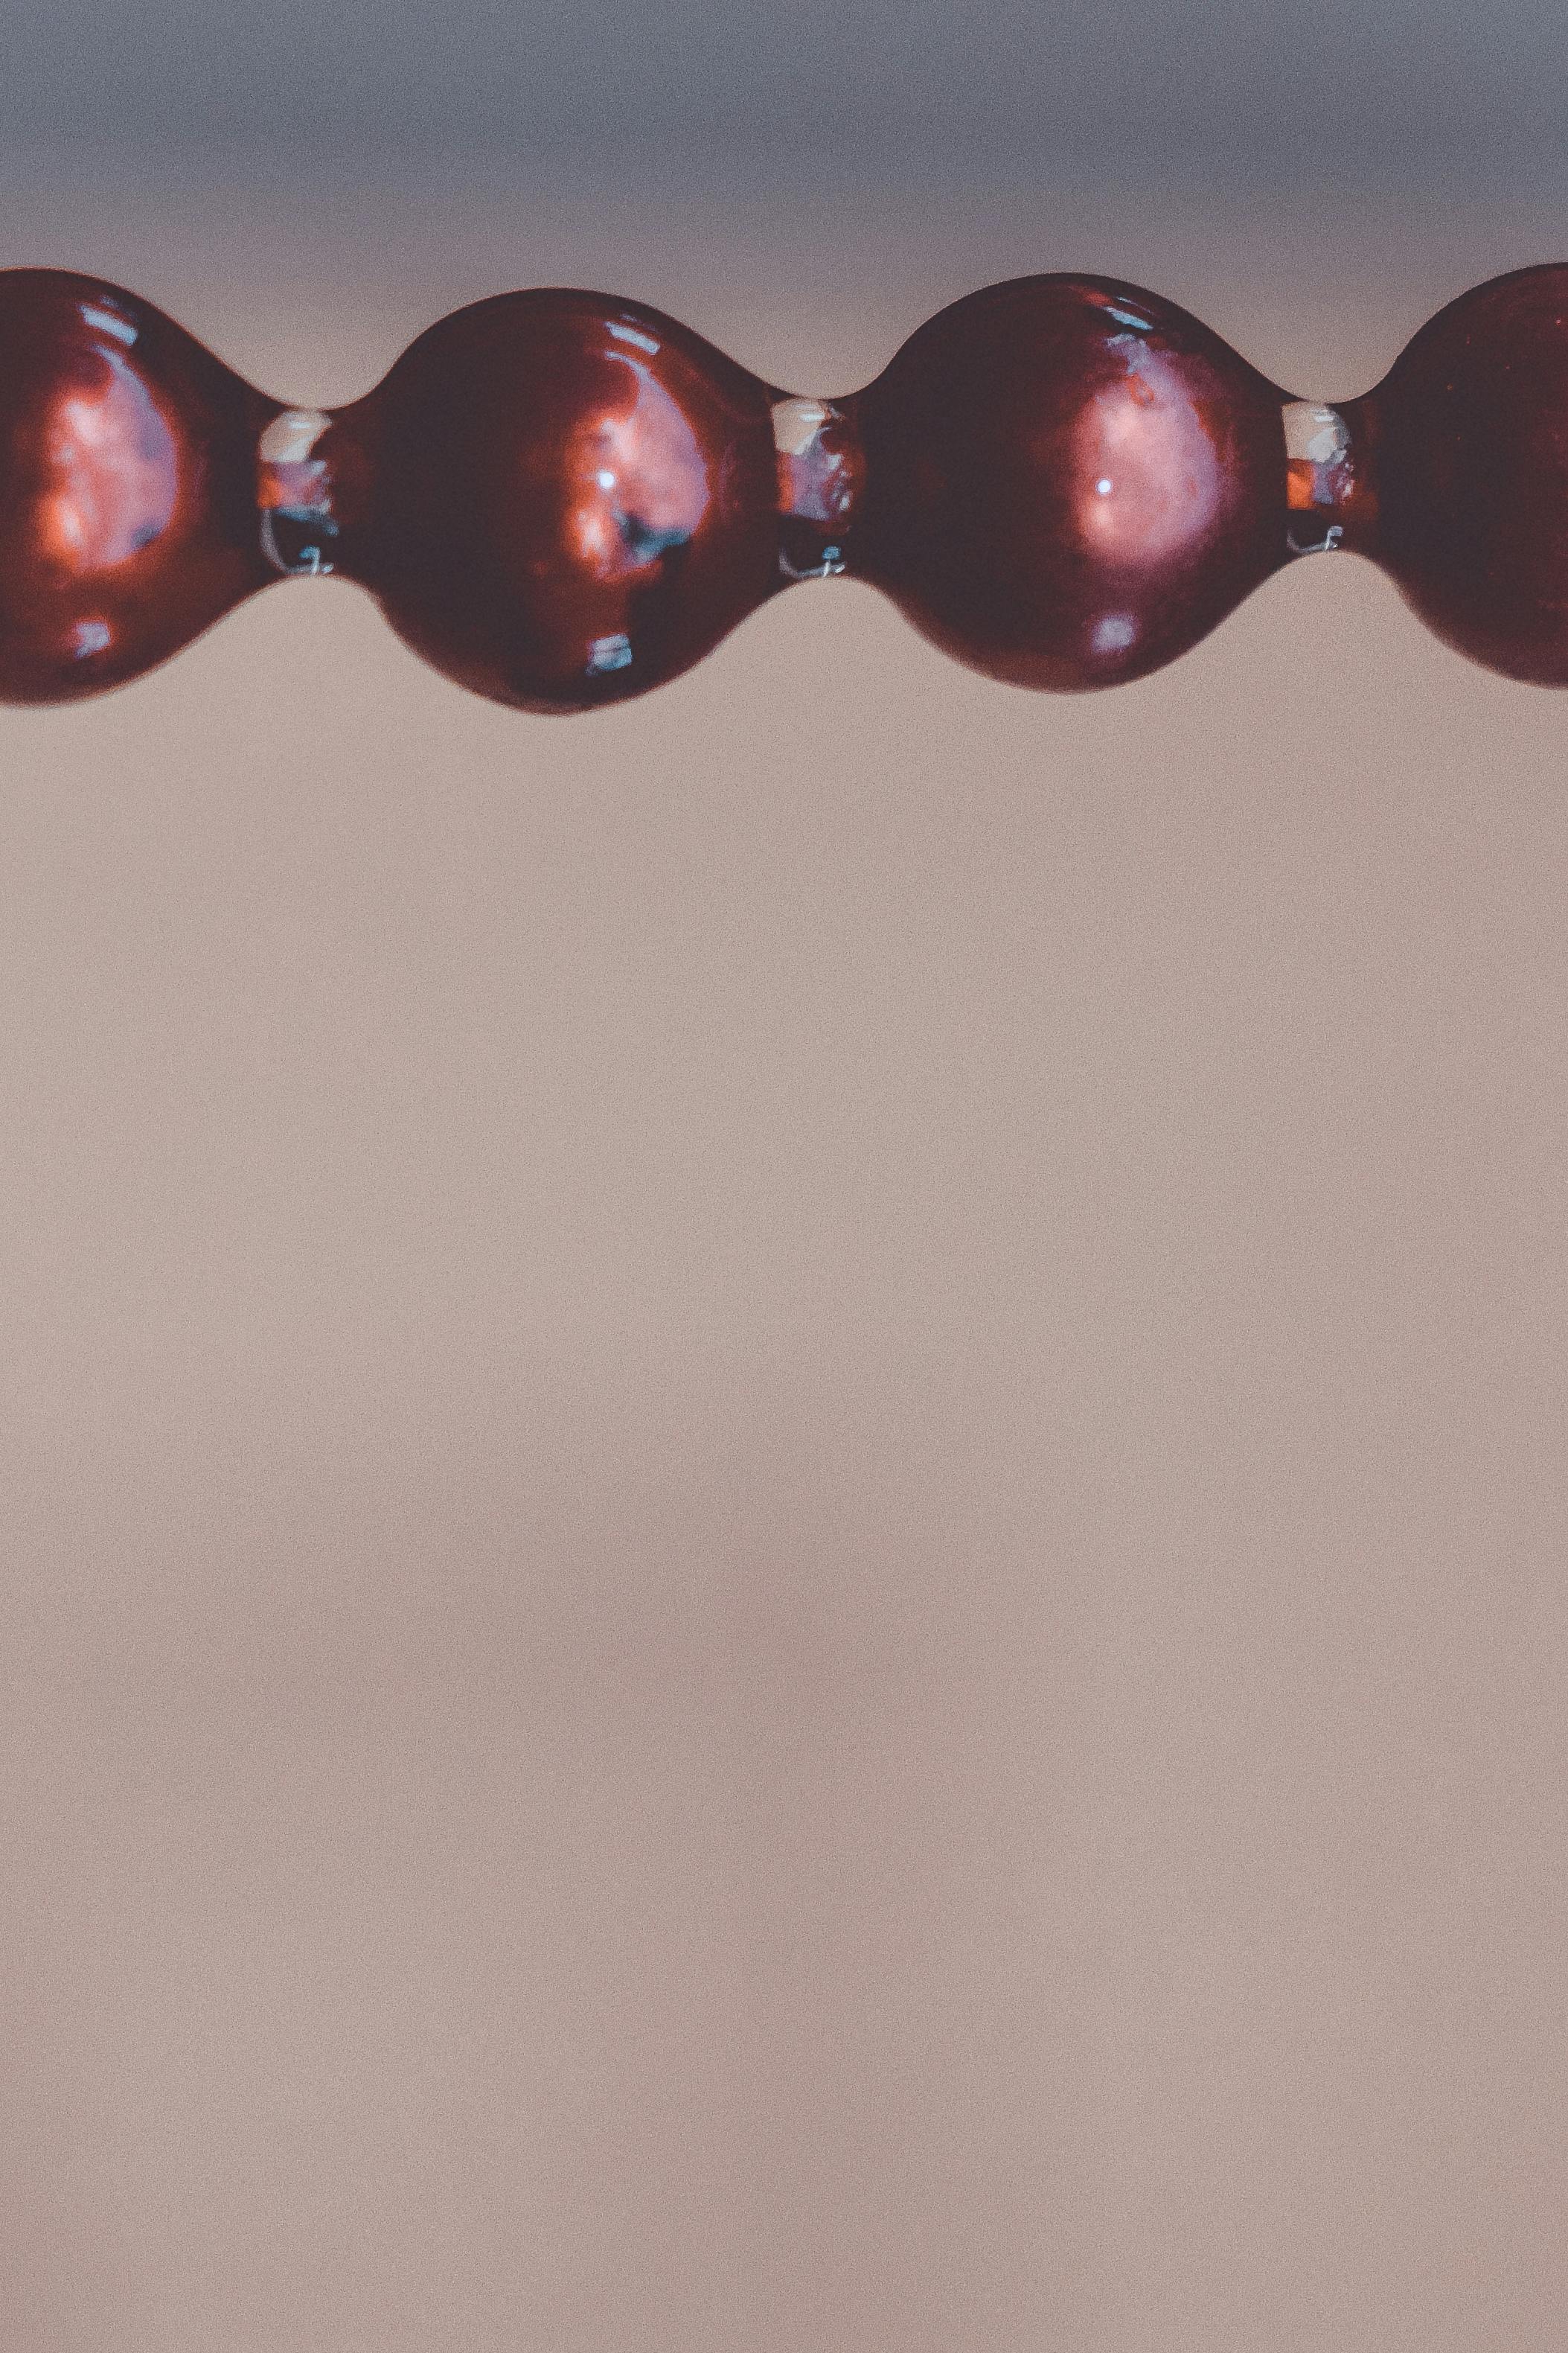 Free stock photo of android wallpaper, beads